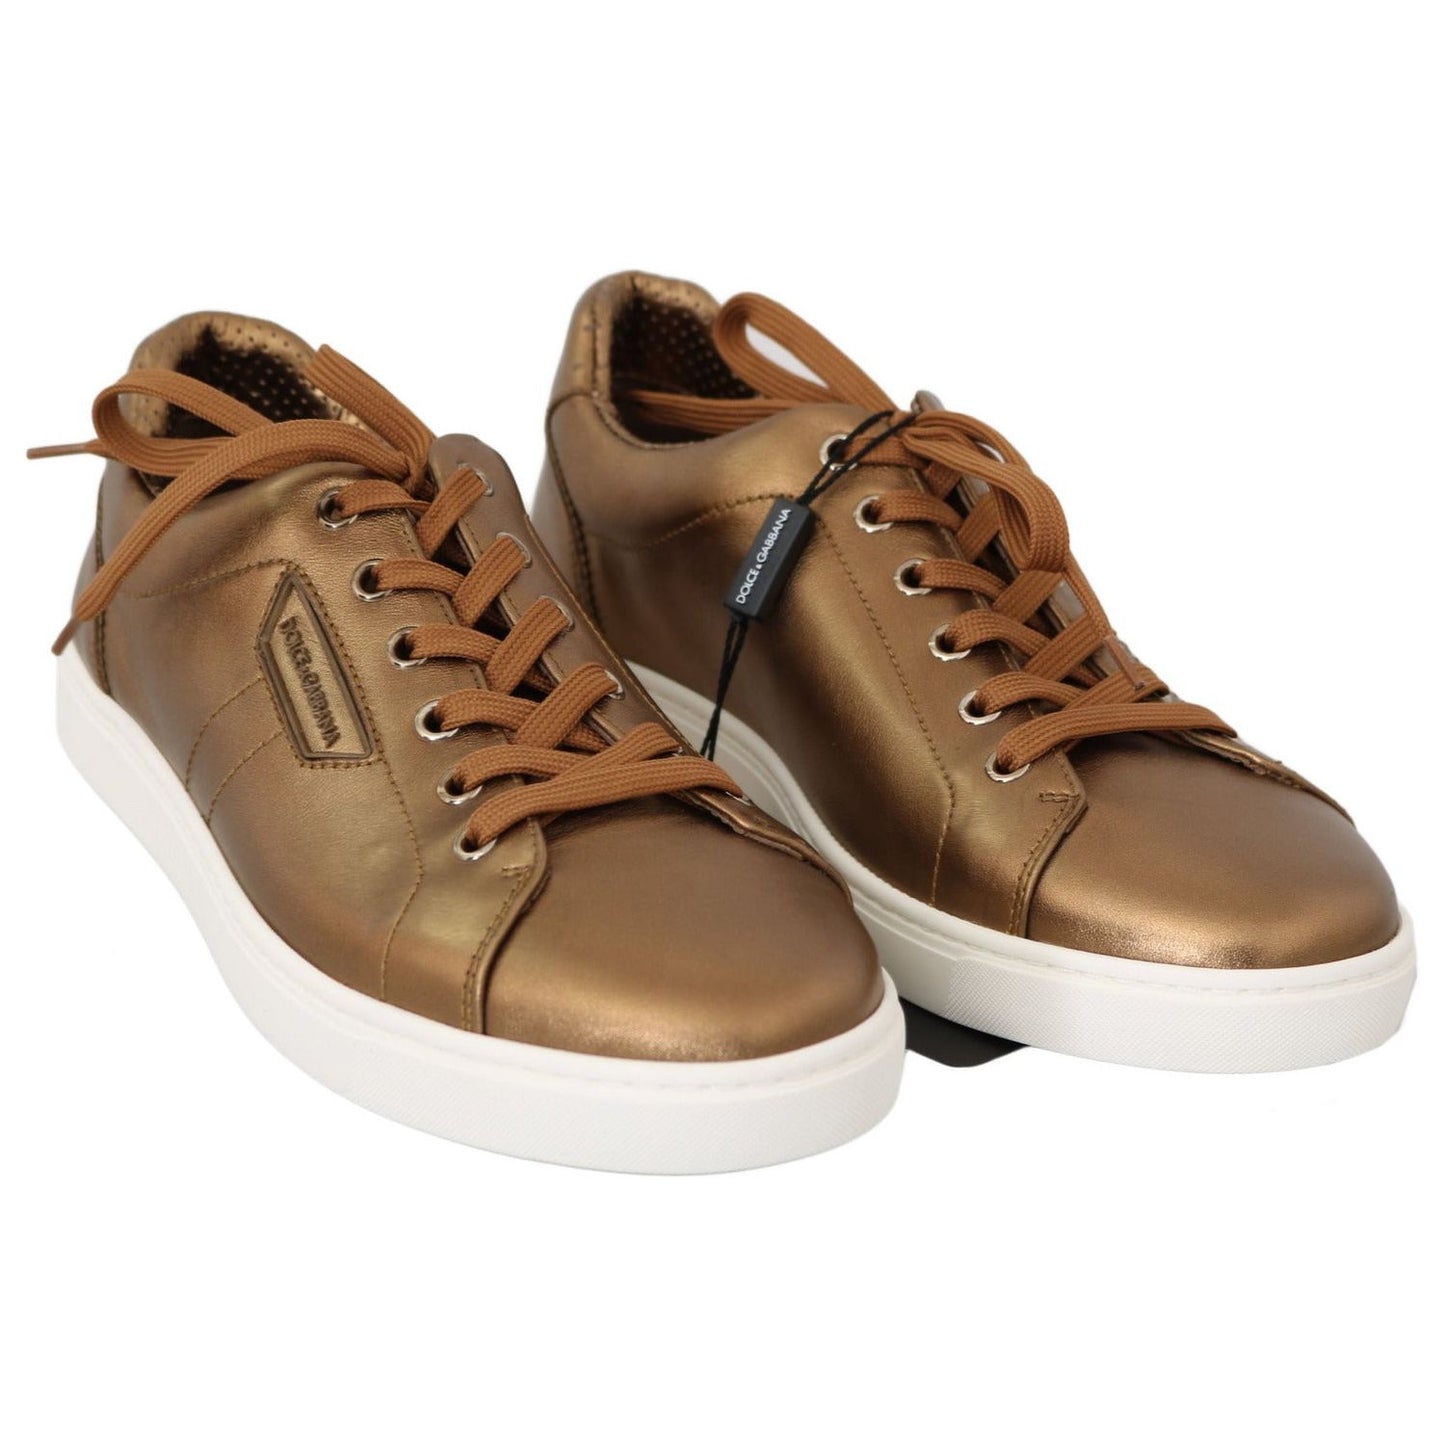 Dolce & Gabbana Golden Metallic Leather Sneakers gold-leather-mens-casual-sneakers IMG_8829-scaled_71ae41cf-360f-438a-9911-3a9a3f5924c3.jpg